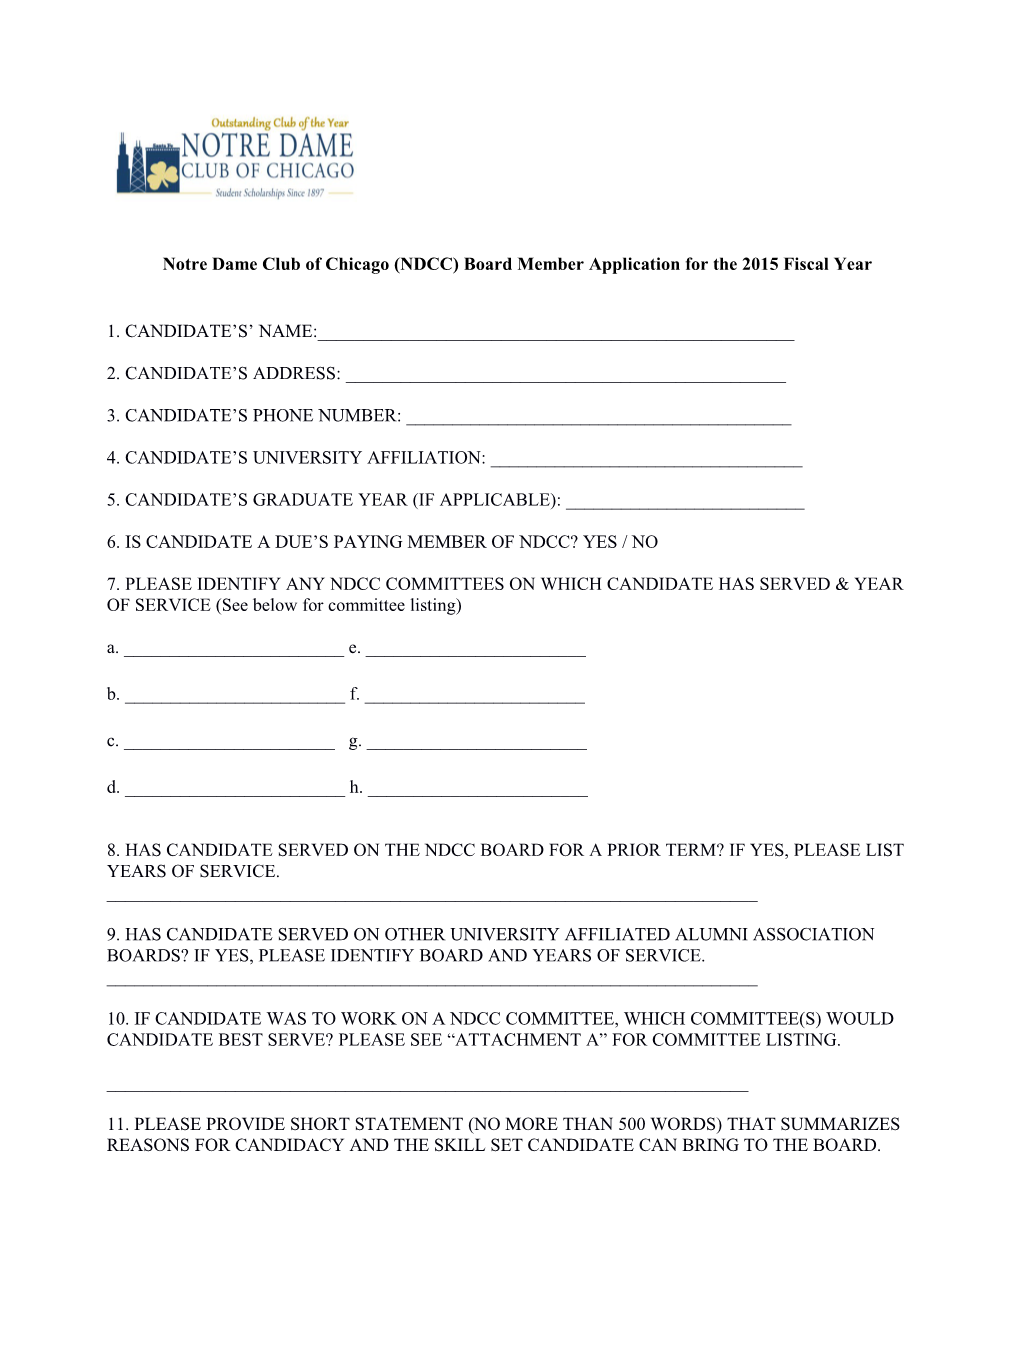 Notre Dame Club of Chicago (NDCC) Board Member Application for the 2015 Fiscal Year